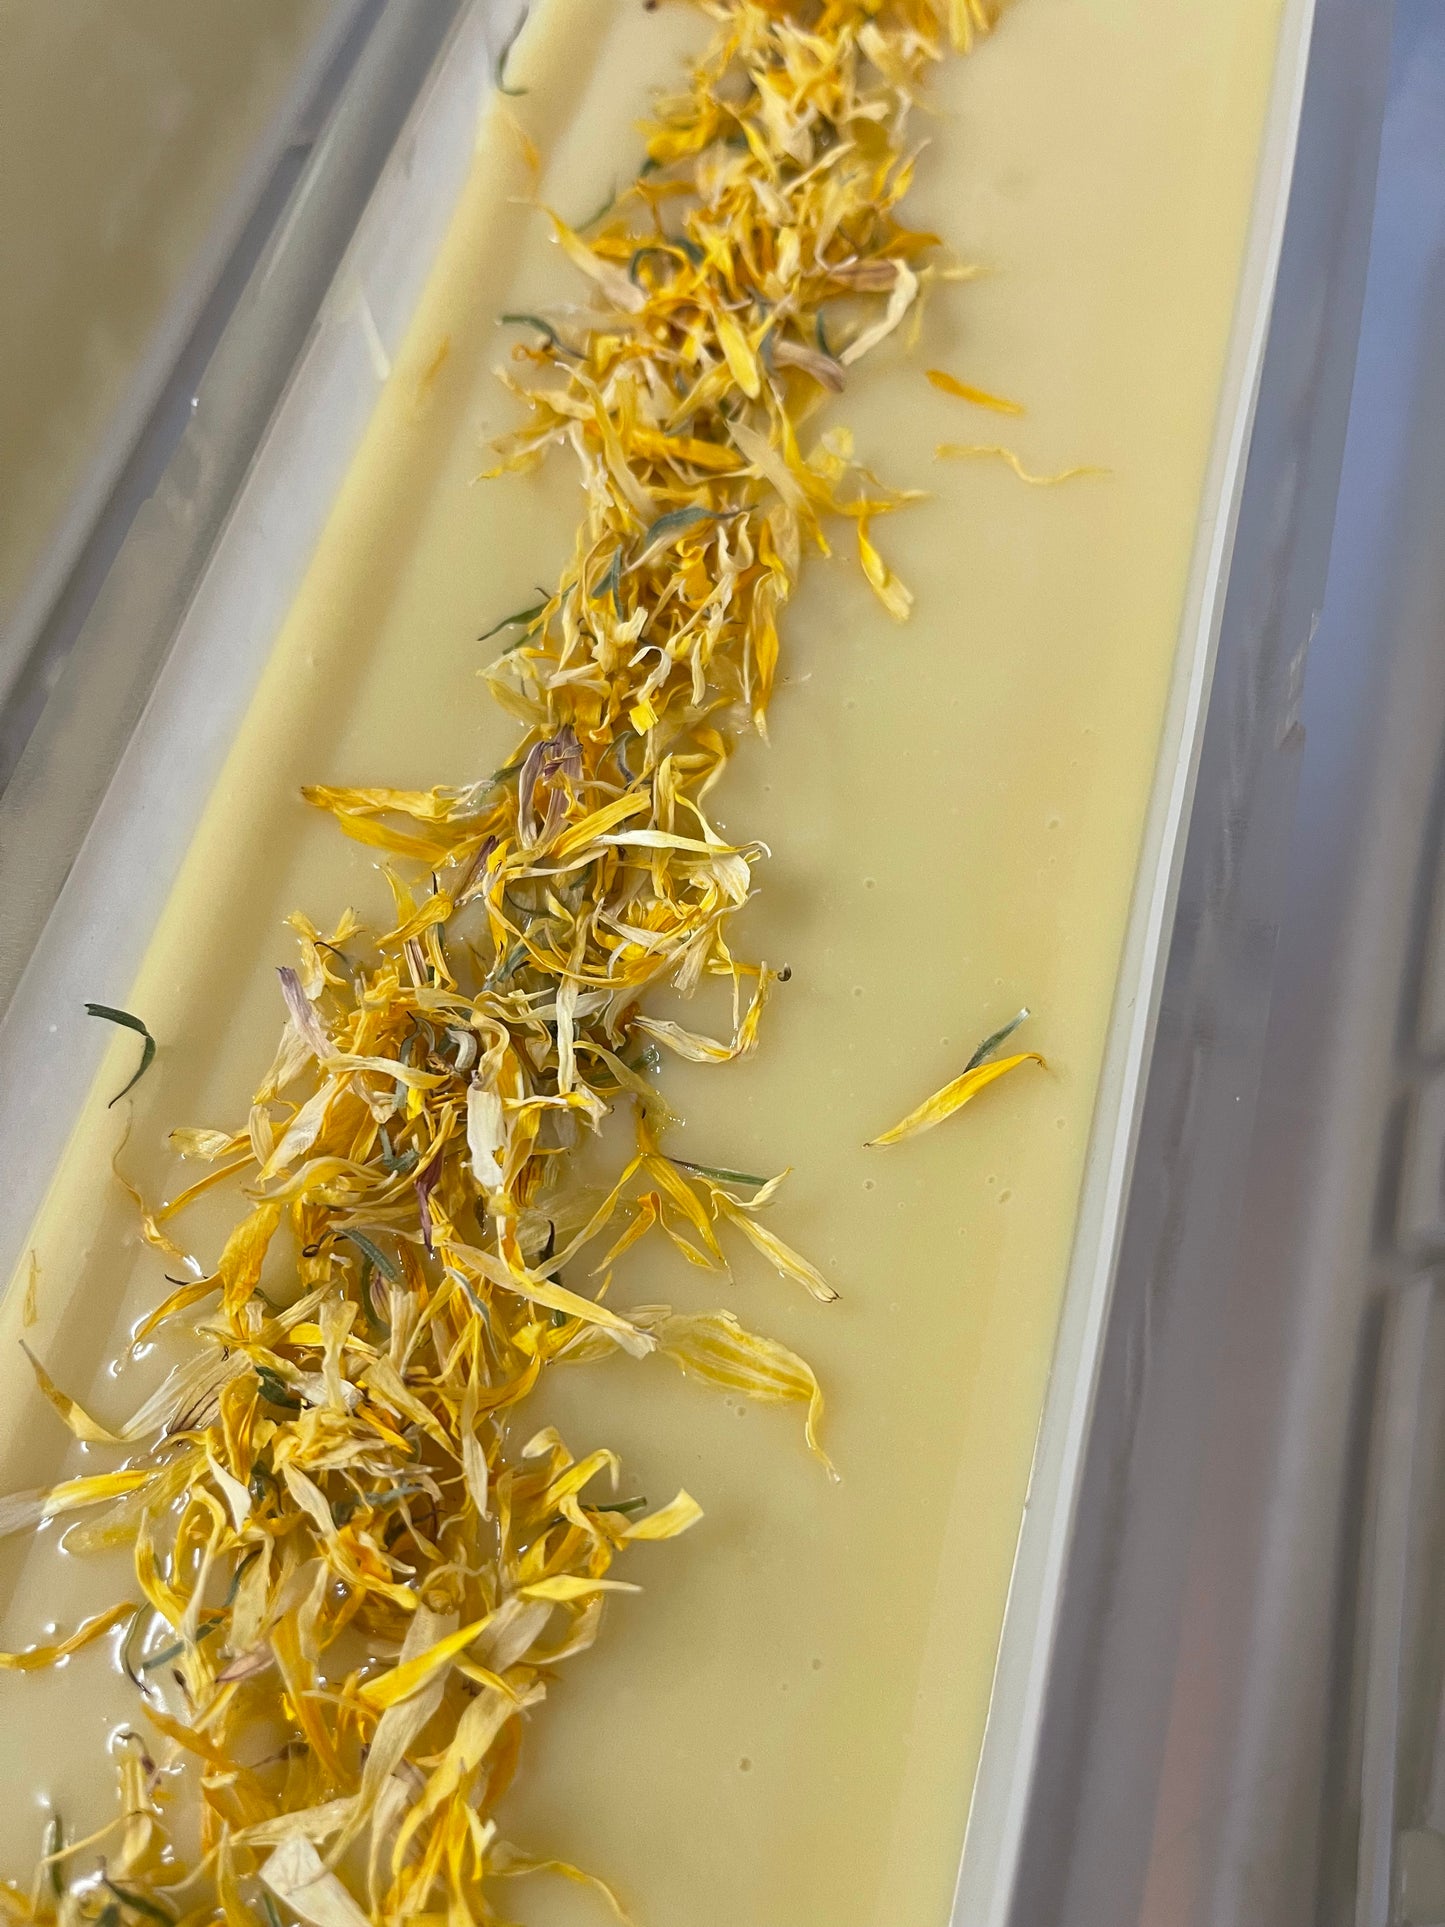 Calendula Soap: The ally for the skin of young and old